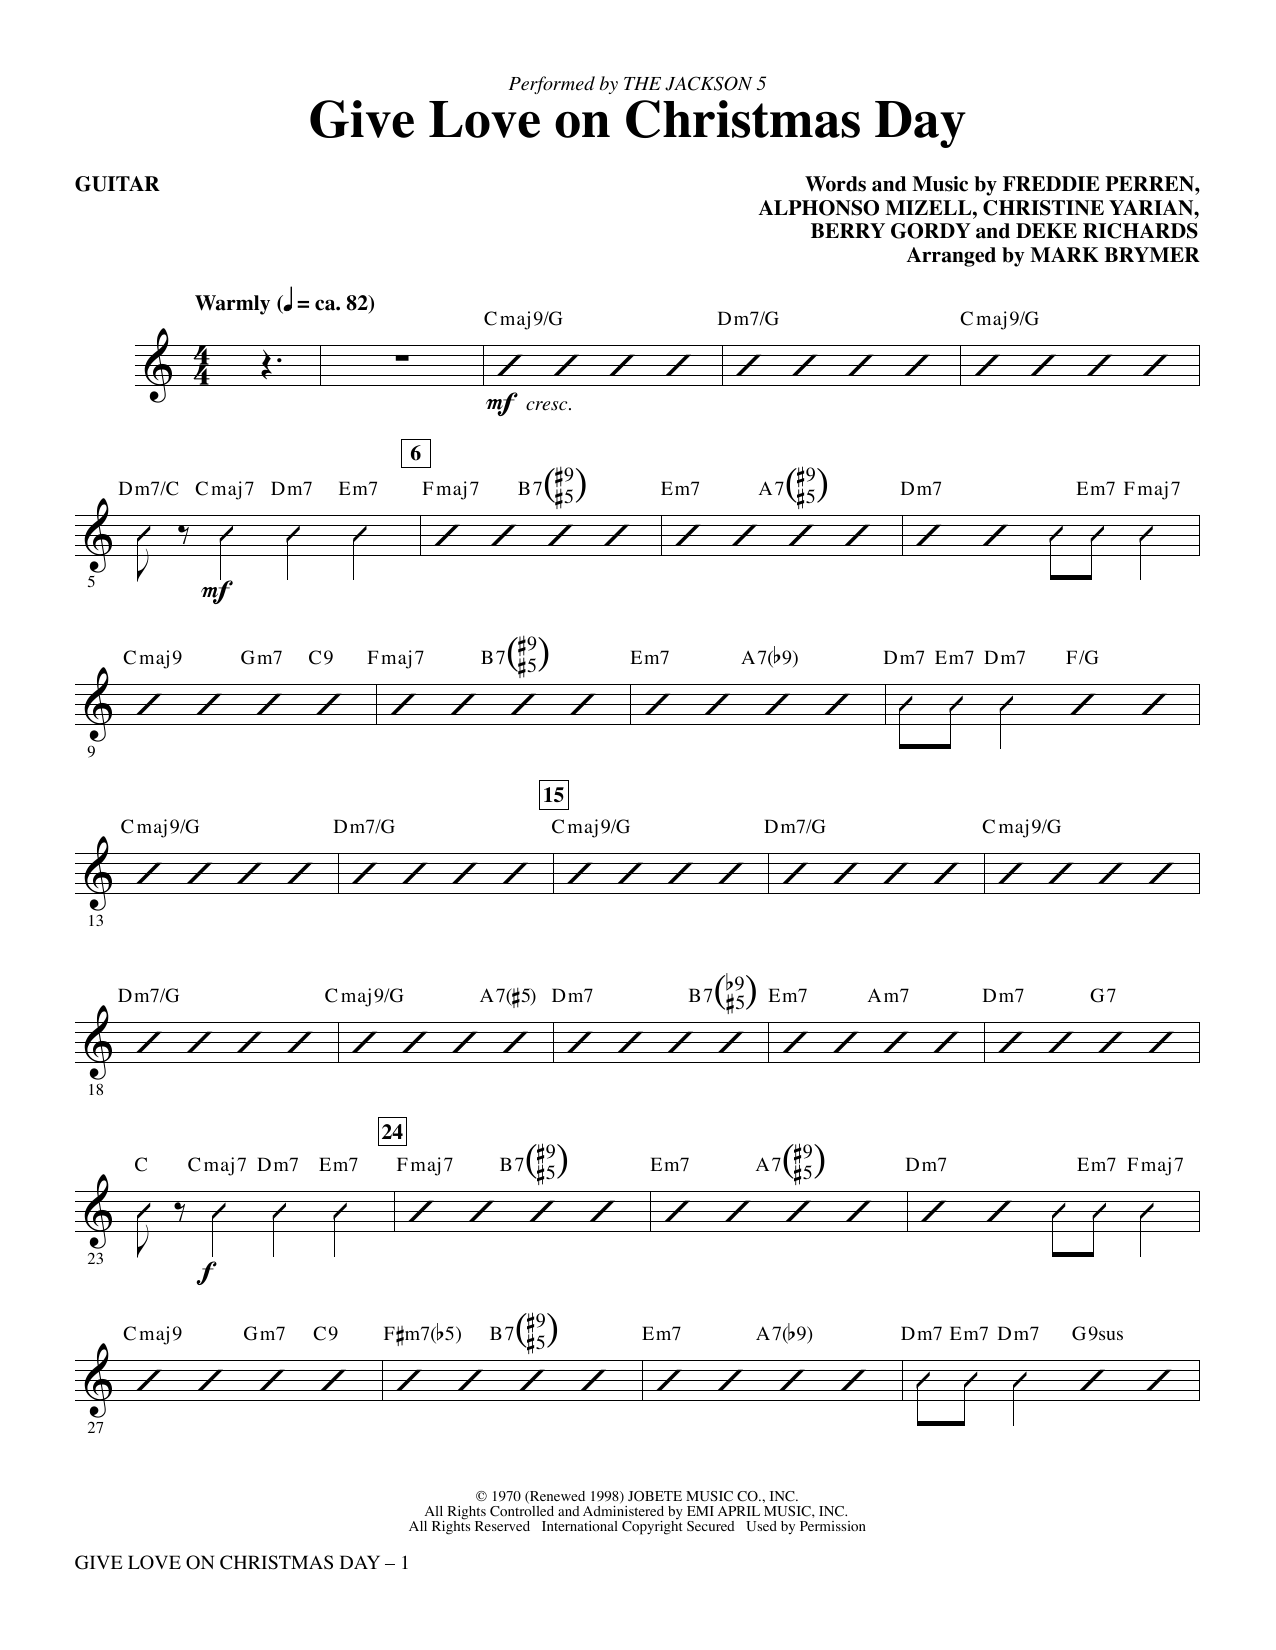 Download The Jackson 5 Give Love on Christmas Day (arr. Mark B Sheet Music